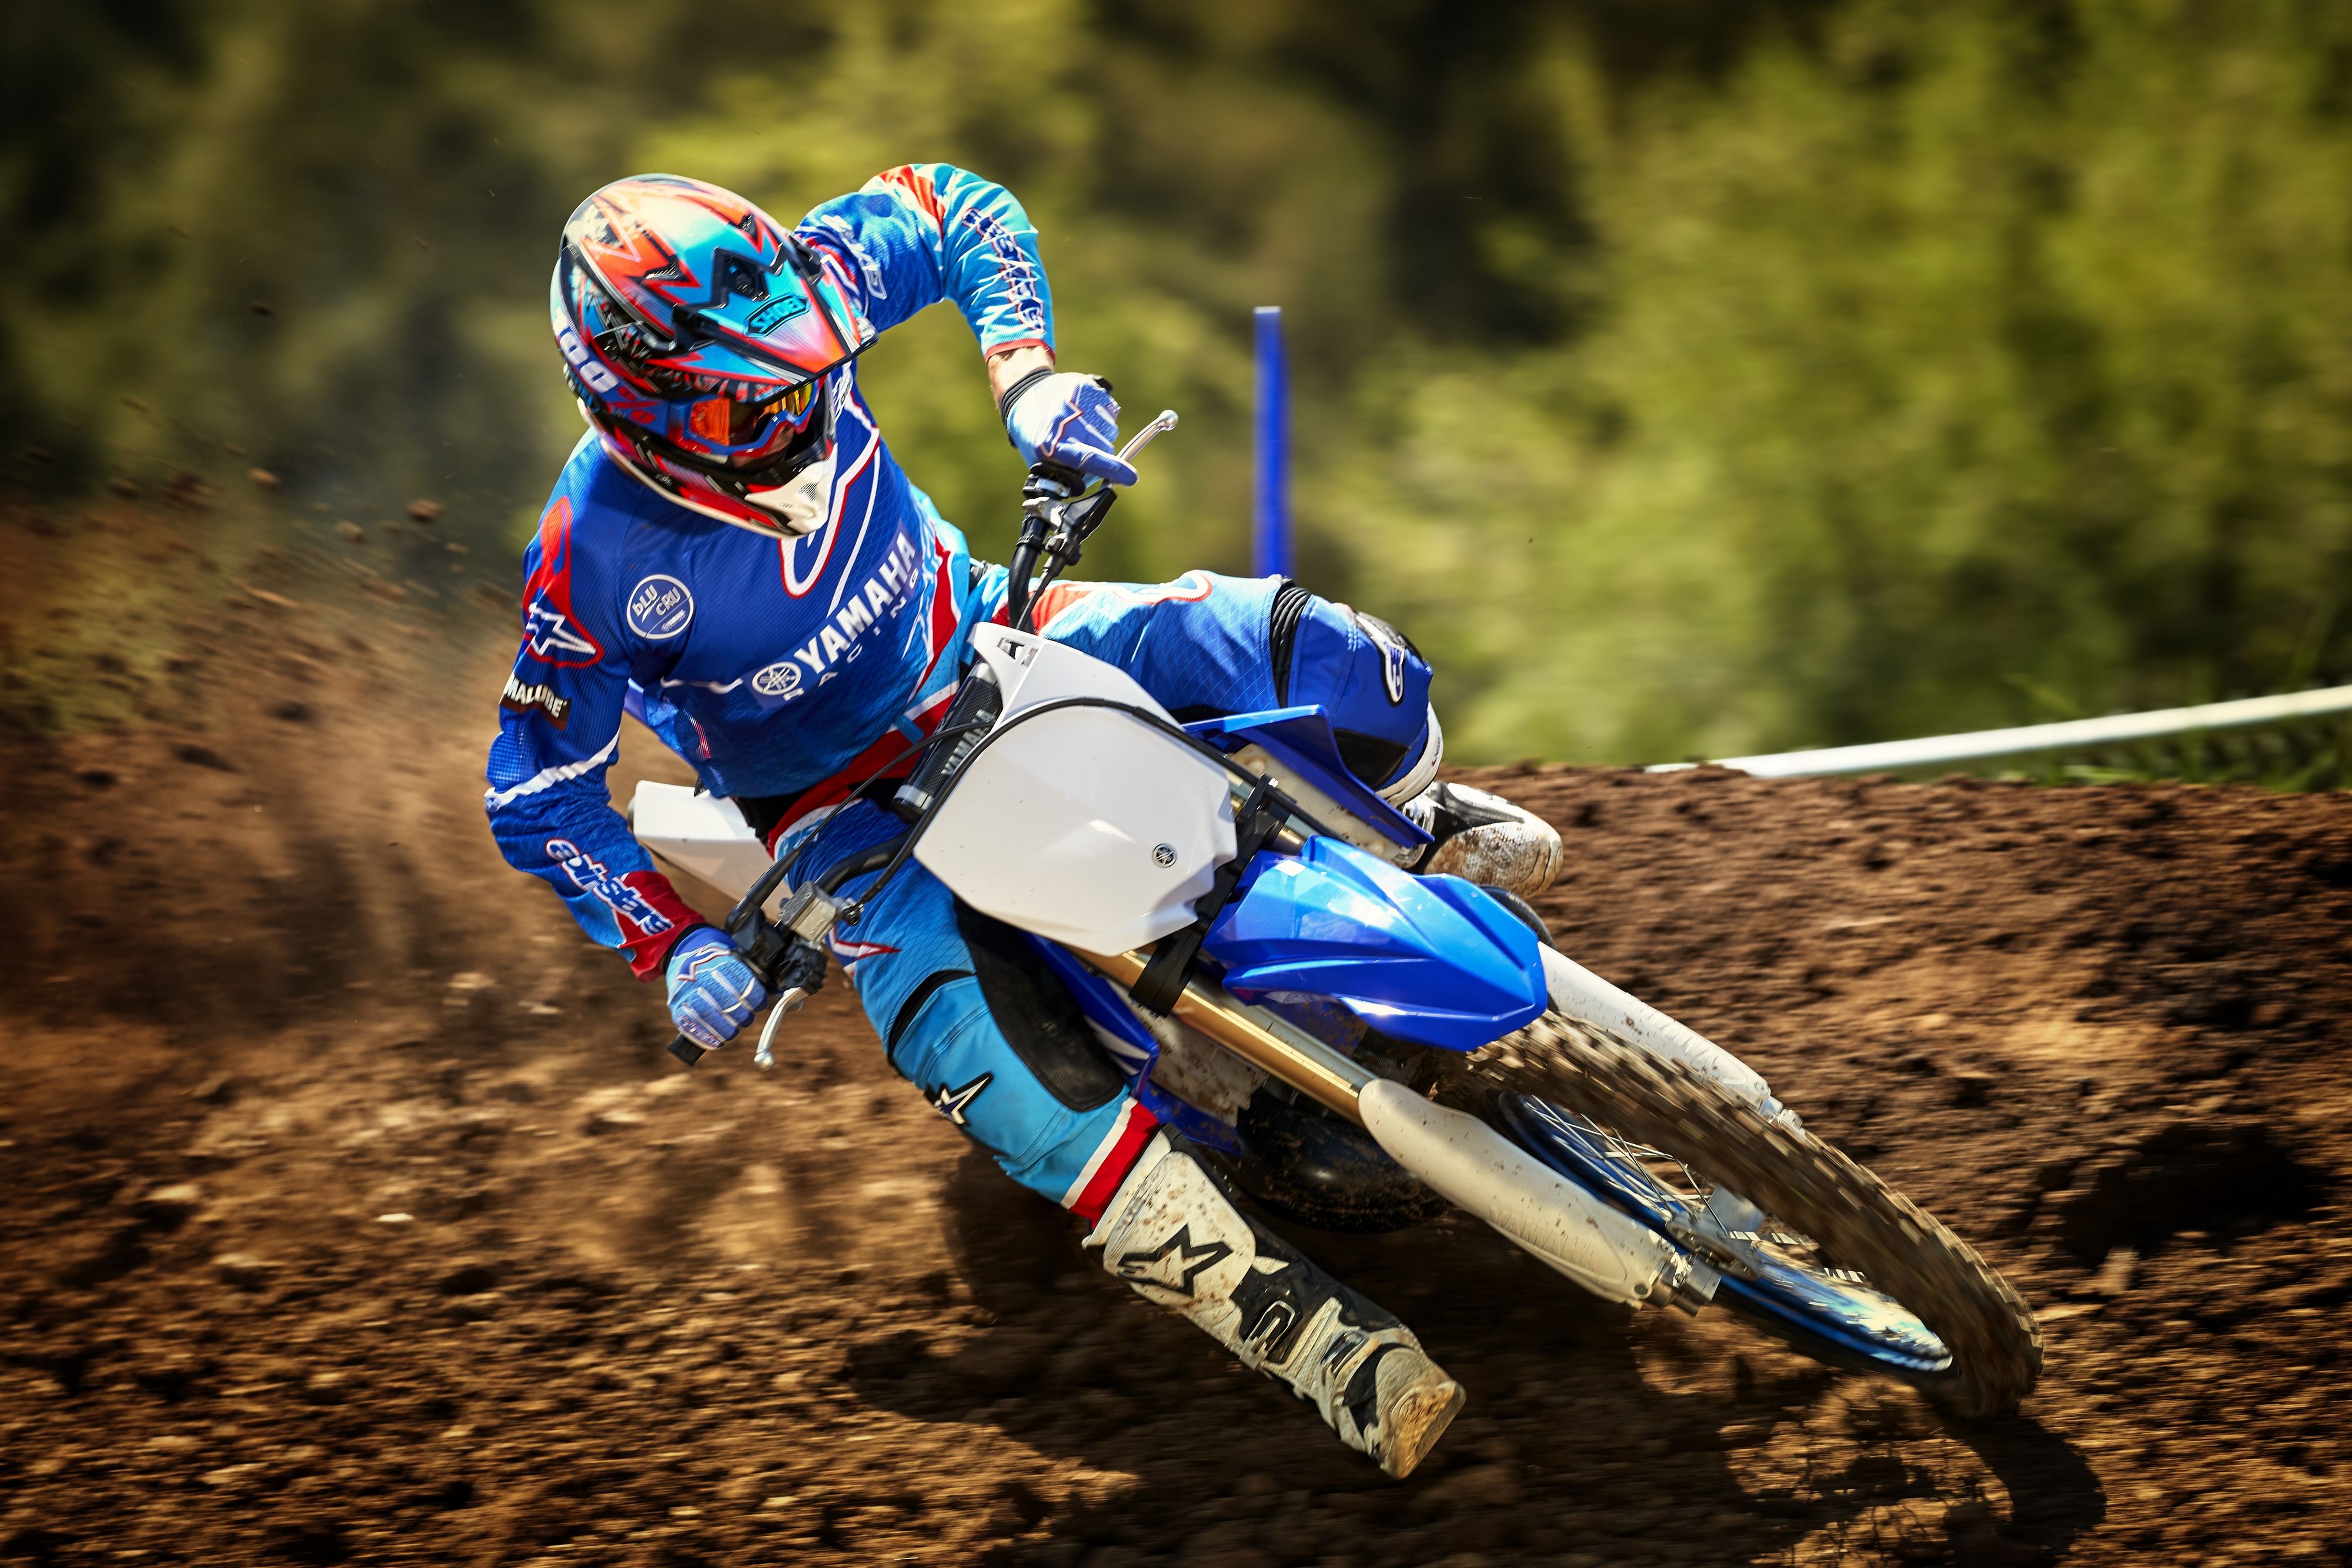 Wallpaper Yamaha YZ Motocross Motorcycle, 4K, Automotive / Bikes,. Wallpaper for iPhone, Android, Mobile and Desktop